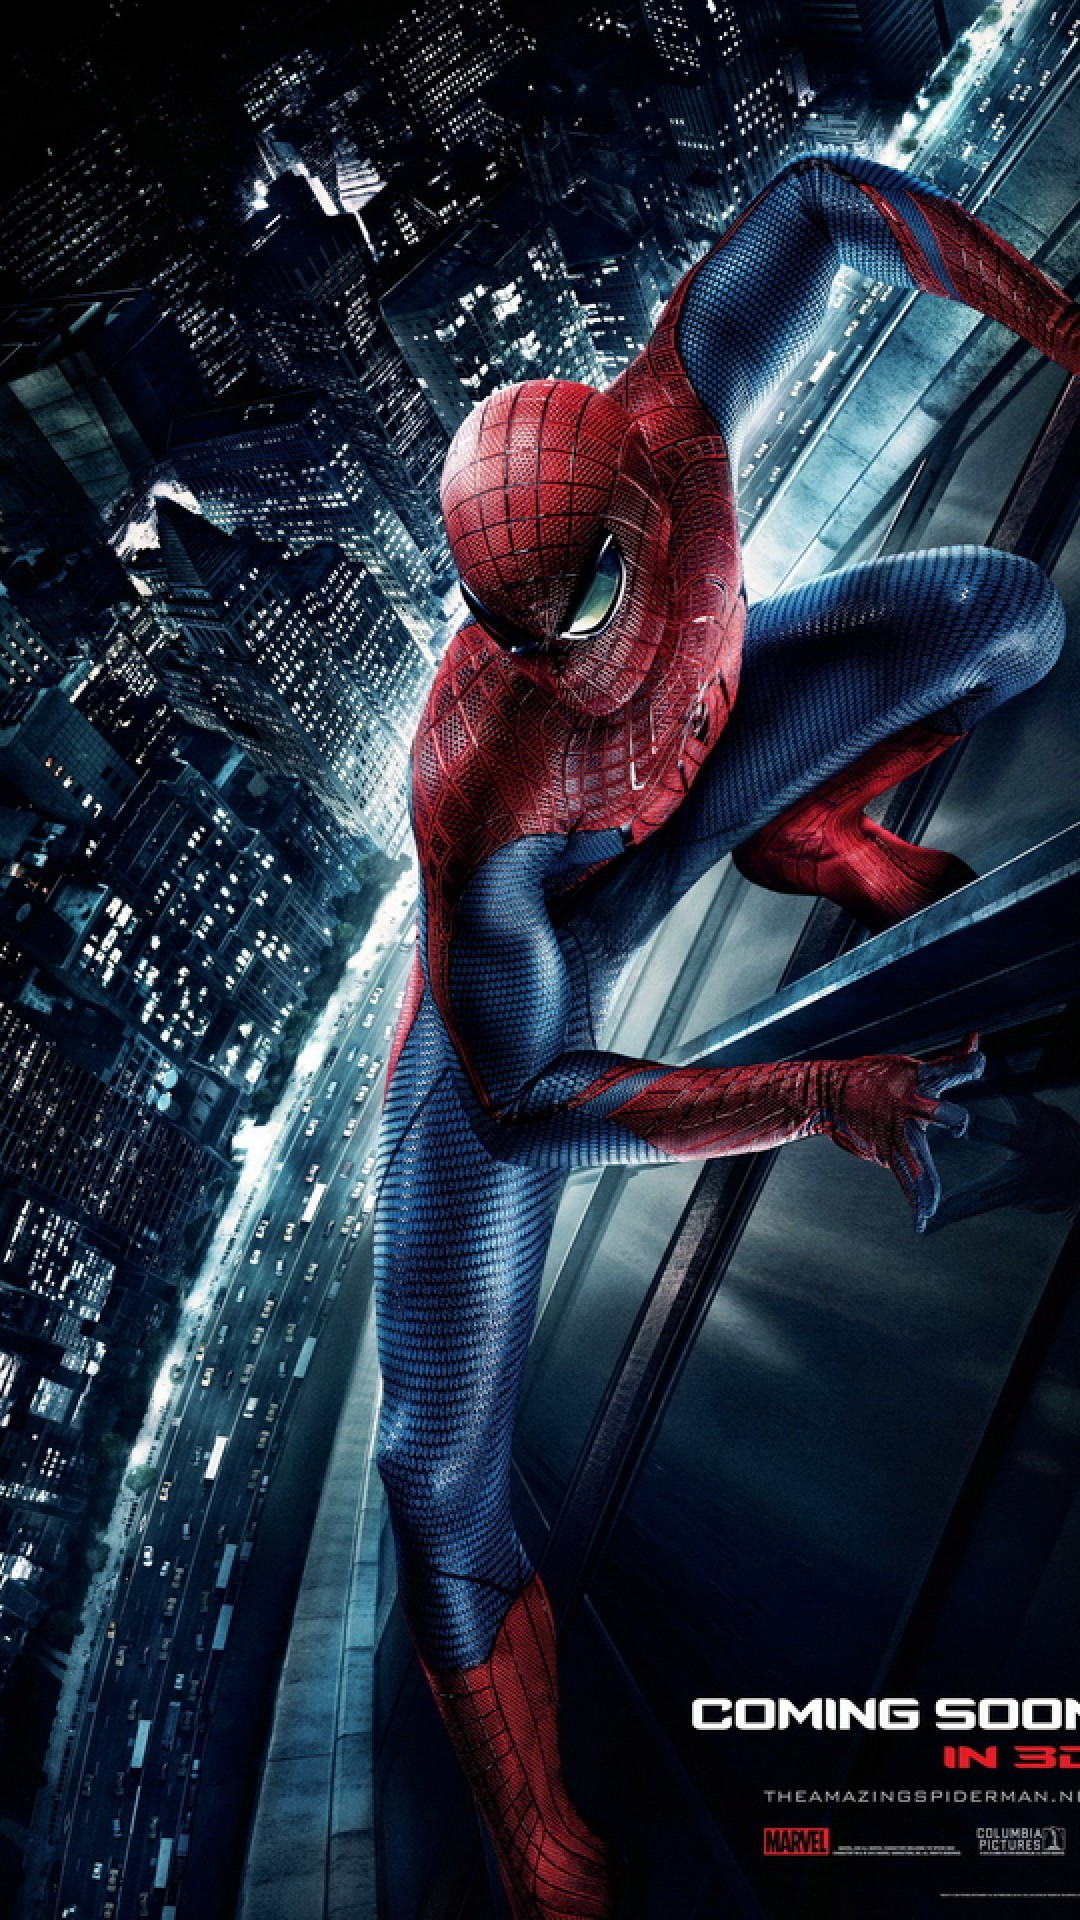 Spiderman Live Wallpapers